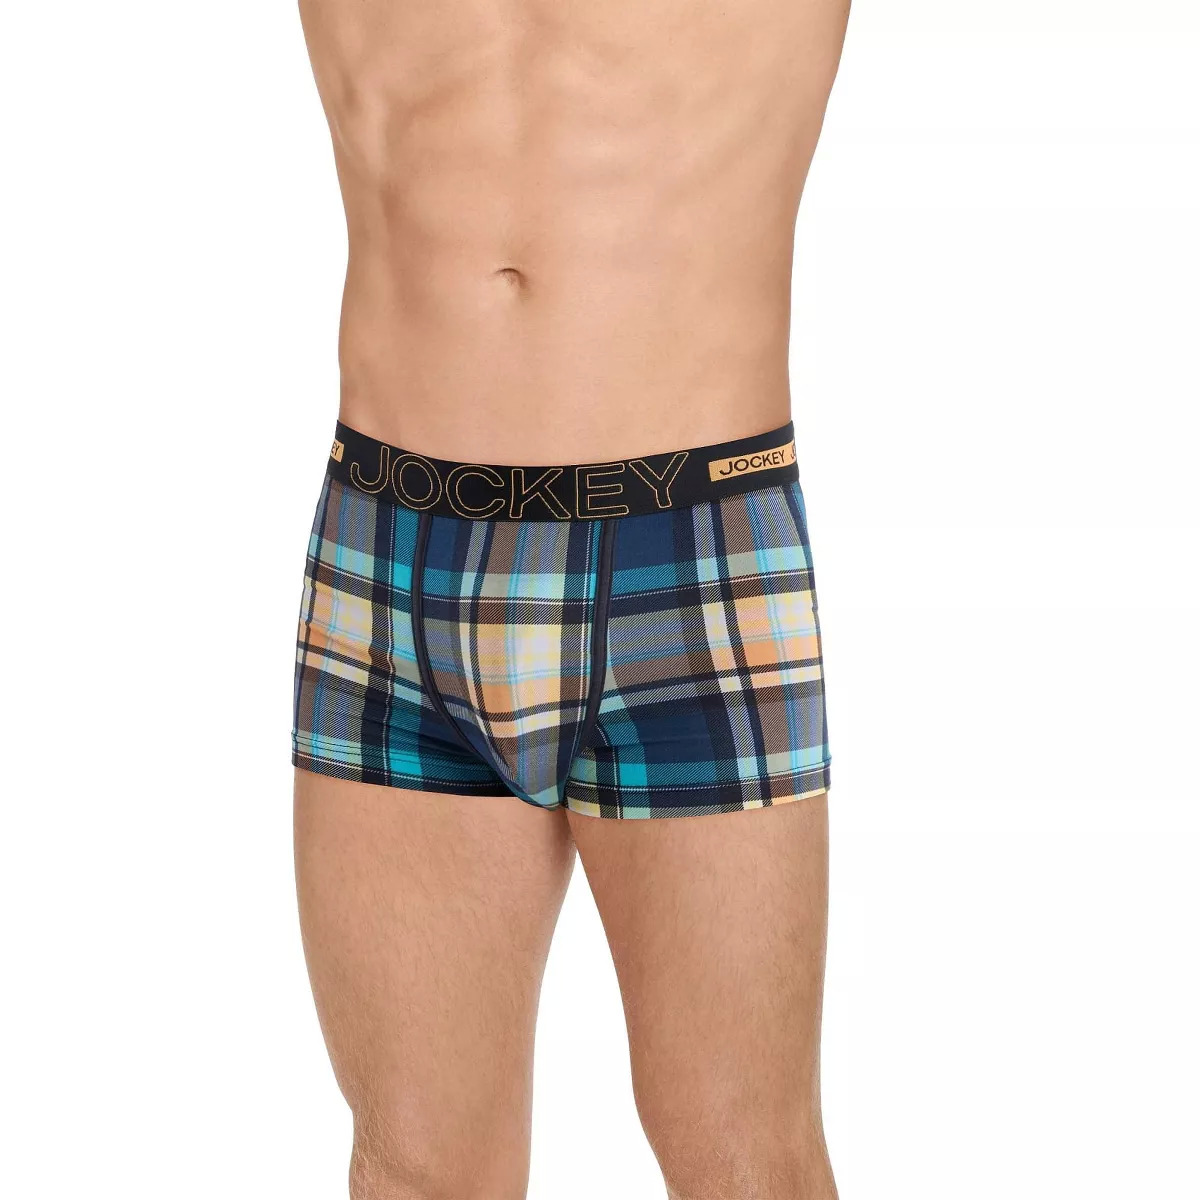 Jockey Men's Cotton Modal 2.5" Trunk (Summer Time Plaid, Size: 2X-Large only) $1.99 + Free Shipping